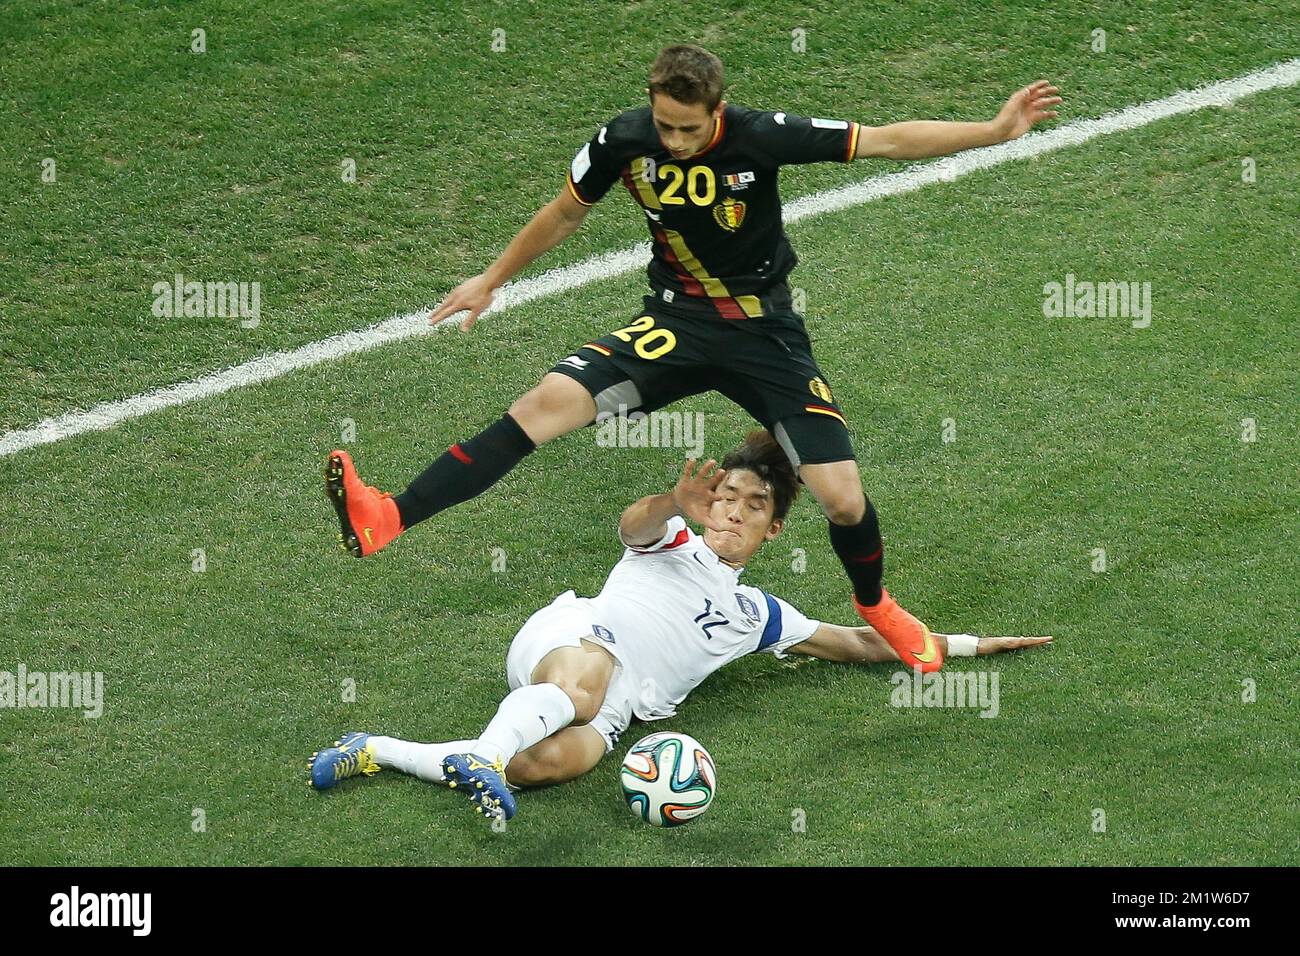 20140626 - SAO PAULO, BRAZIL: Belgium's Adnan Januzaj and South Korea's Lee Yong fight for the ball during the match between Belgian national soccer team Red Devils and South-Korea, third match in group H, in the stadium 'Arena de Sao Paulo', in Itaquera, Sao Paulo, Brazil, during the 2014 FIFA World Cup, Thursday 26 June 2014. The Red Devils lead their group H with two victories. BELGA PHOTO BRUNO FAHY Stock Photo